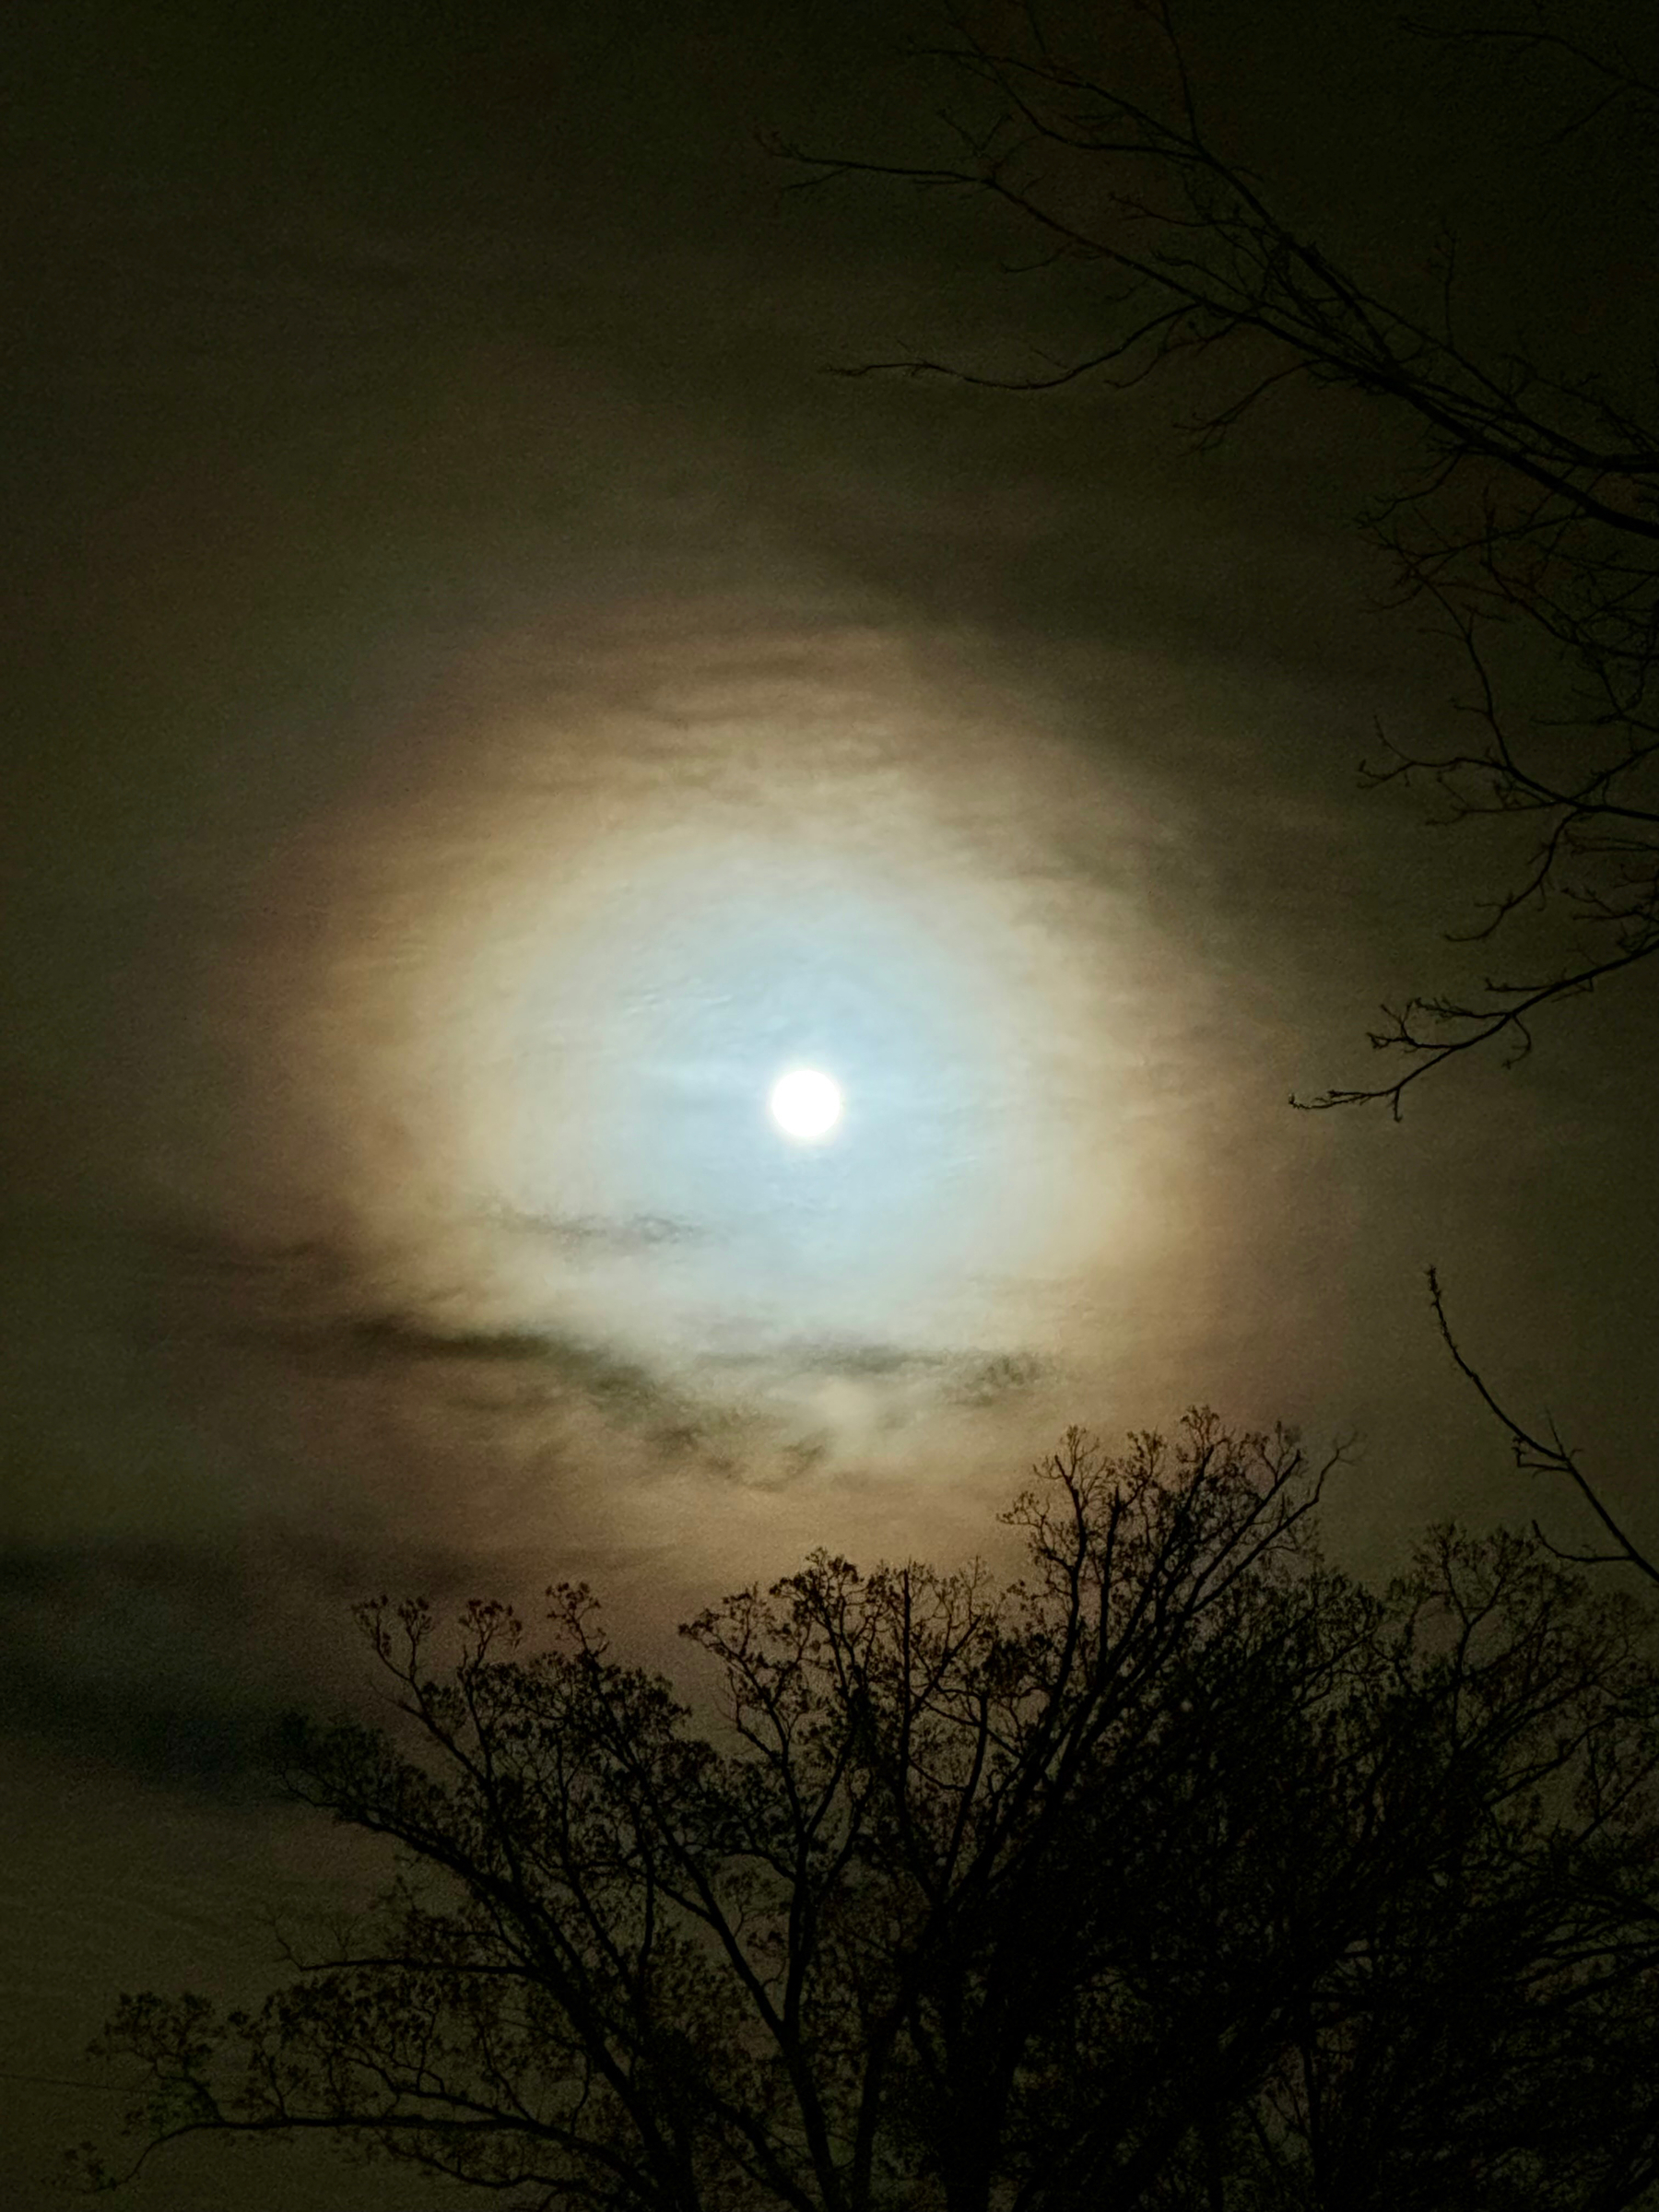 A night sky with a bright moon surrounded by a halo of light, with silhouetted bare tree branches in the foreground.